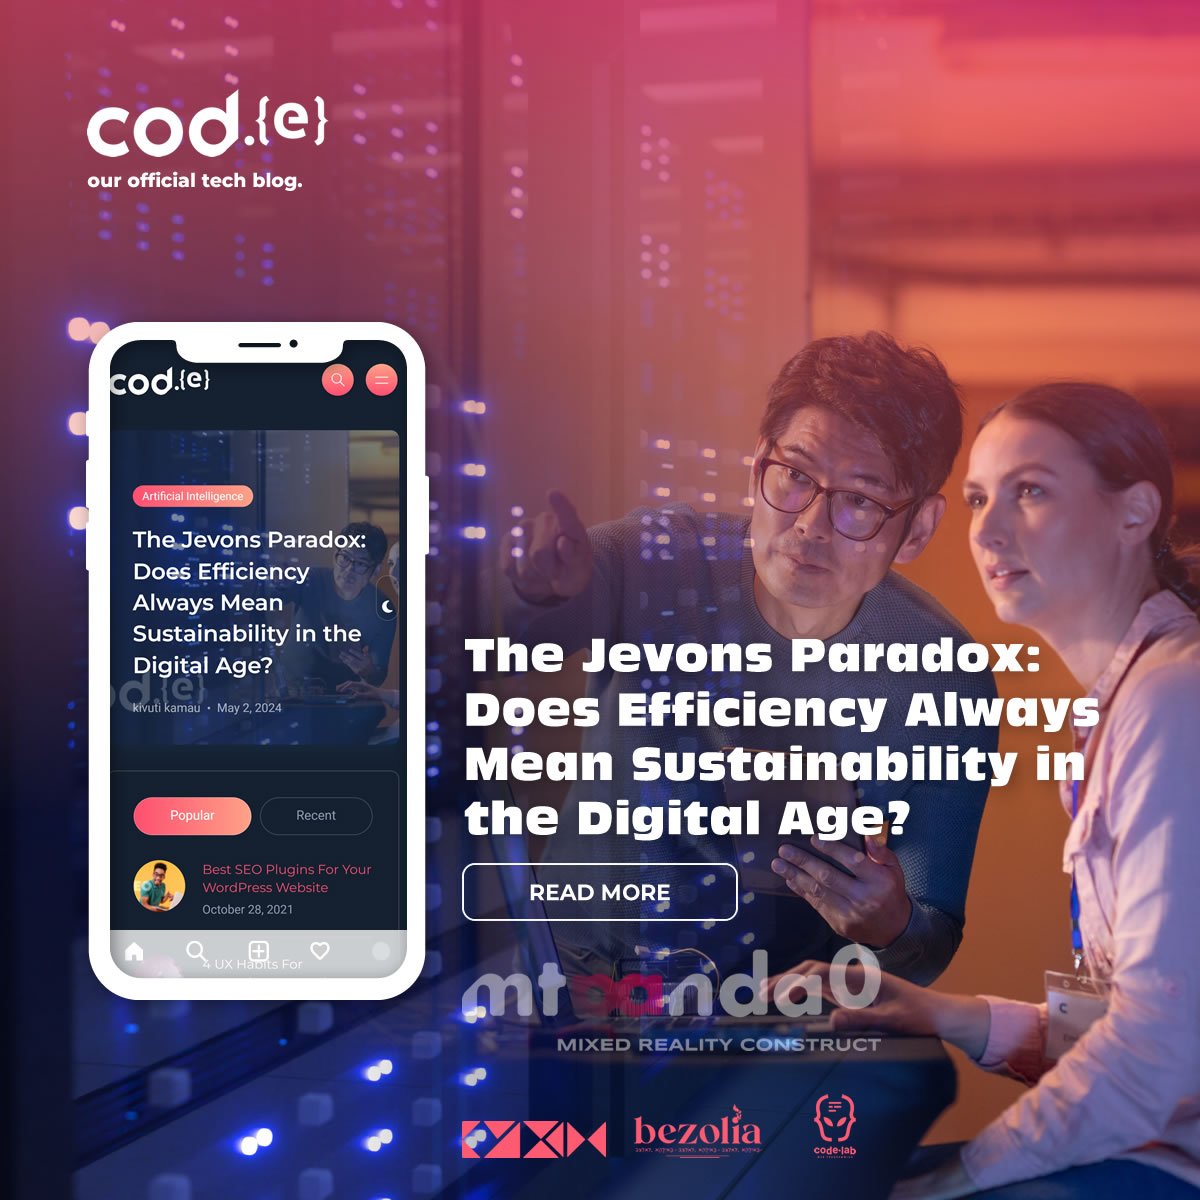 The Jevons Paradox: Does Efficiency Always Mean Sustainability In The Digital Age? #jevonsparadox #DigitalSustainability